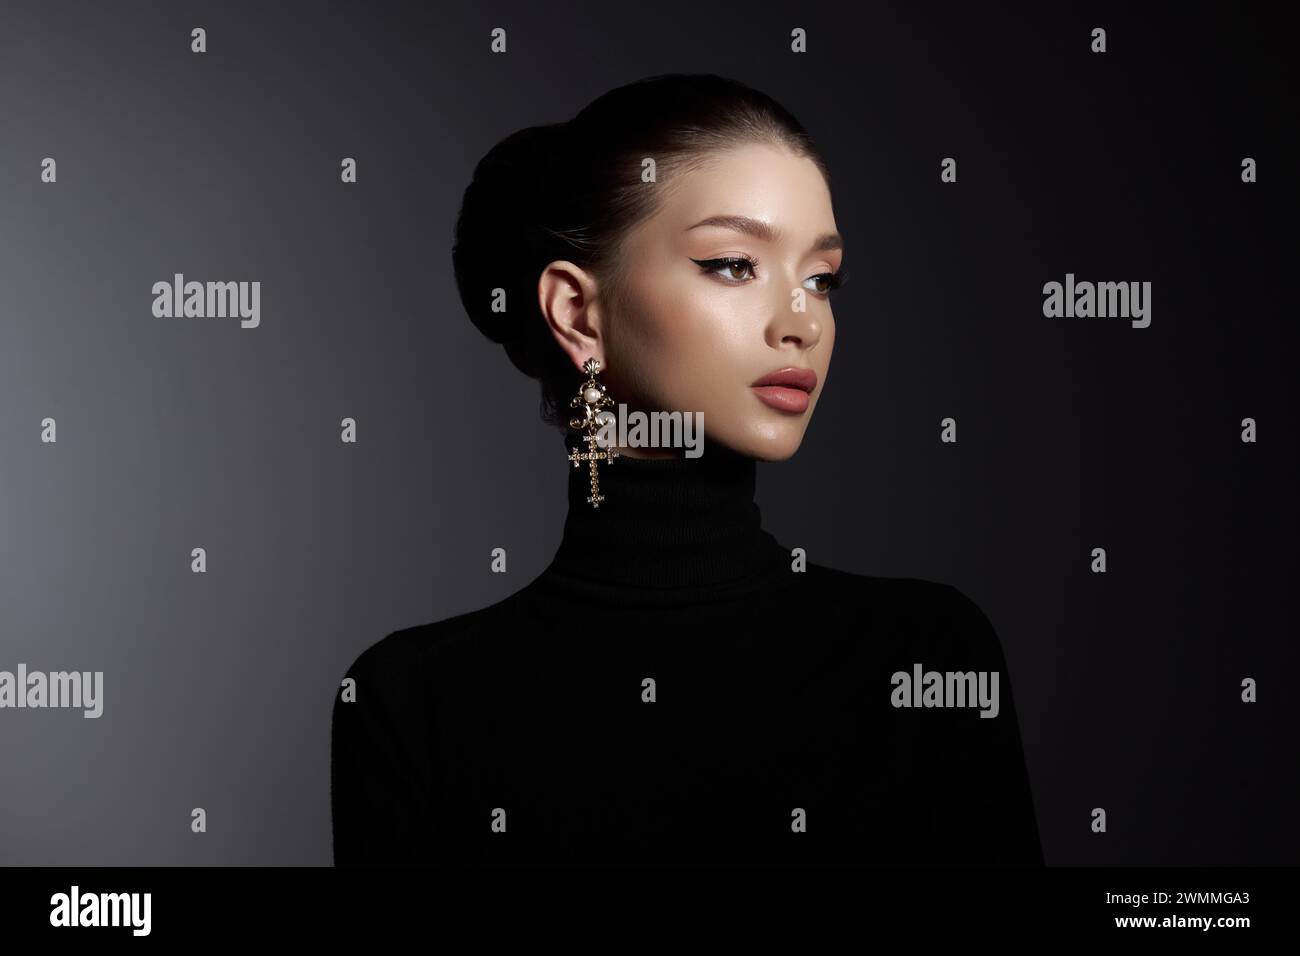 Woman with elegant makeup and a cross earring poses in a black turtleneck, exuding sophistication Stock Photo